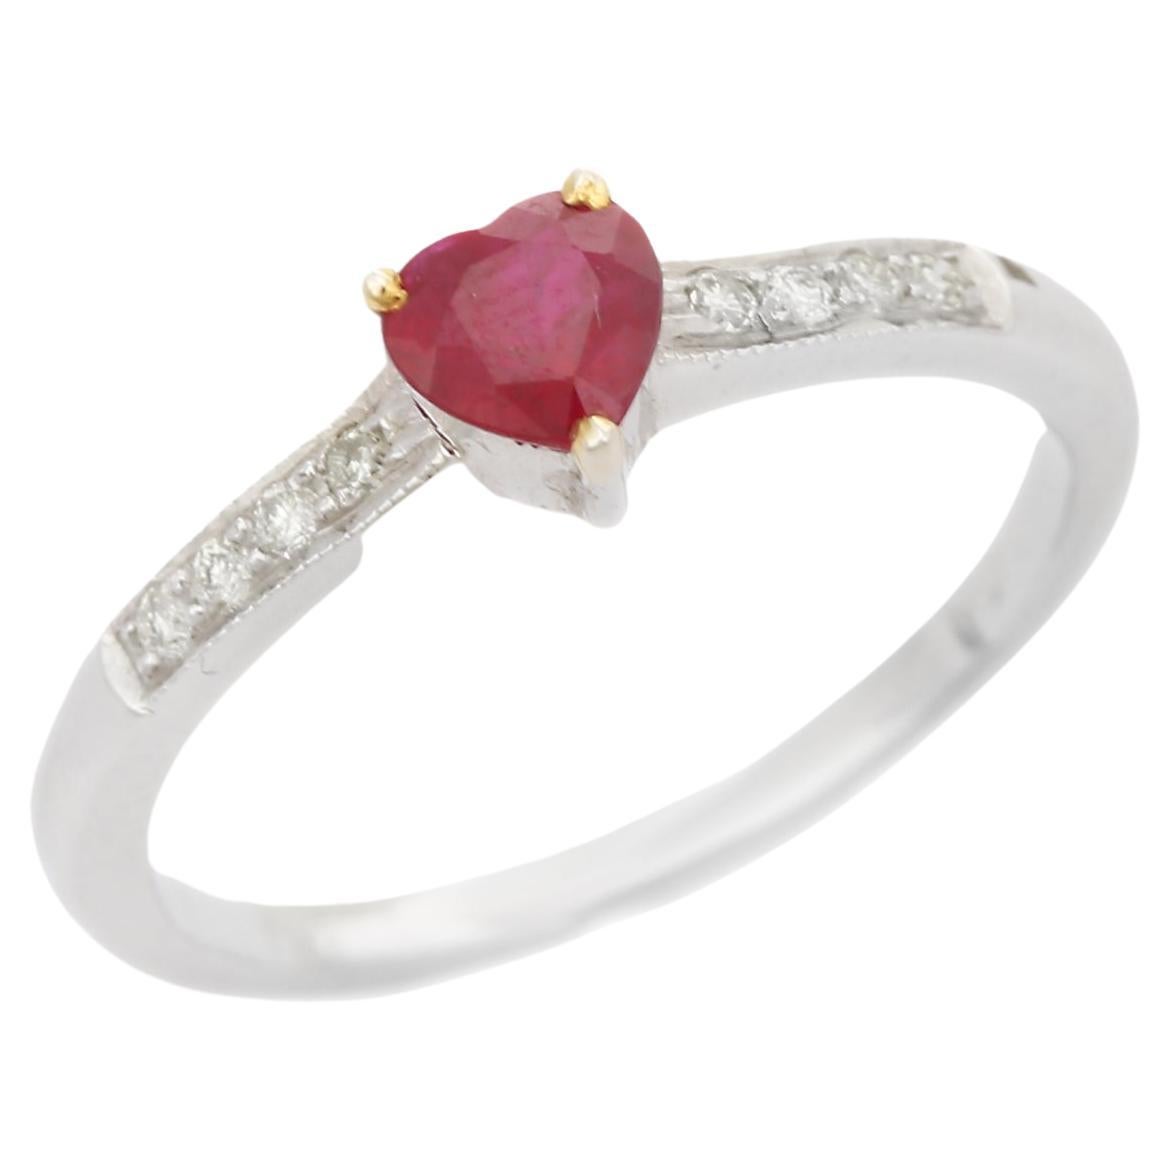 For Sale:  Dainty Heart Cut Ruby Ring 18k Solid White Gold with Diamonds